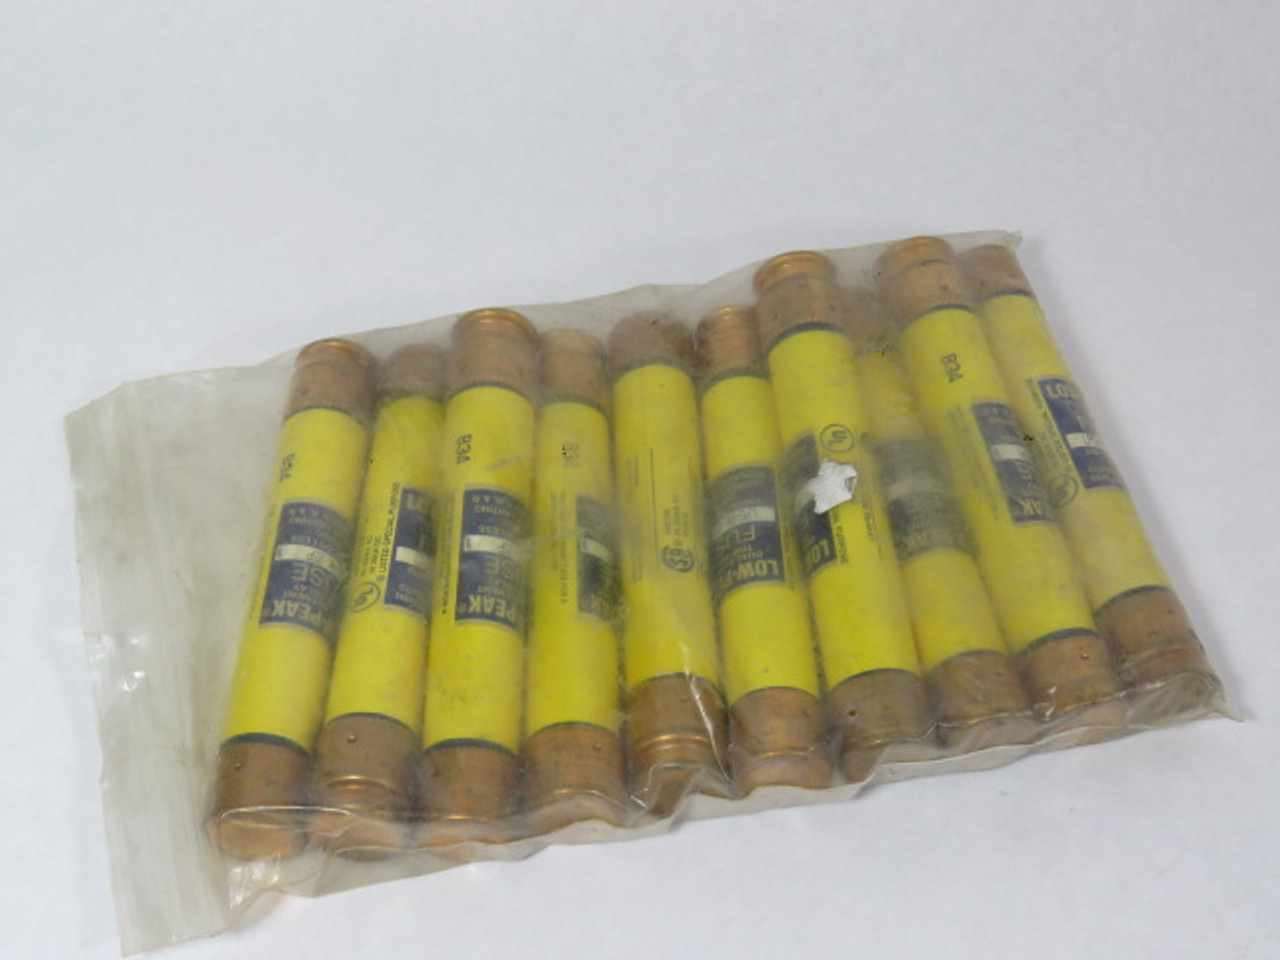 Low-Peak LPS-RK-2SP Dual Element Fuse 2A 600V Lot of 10 USED